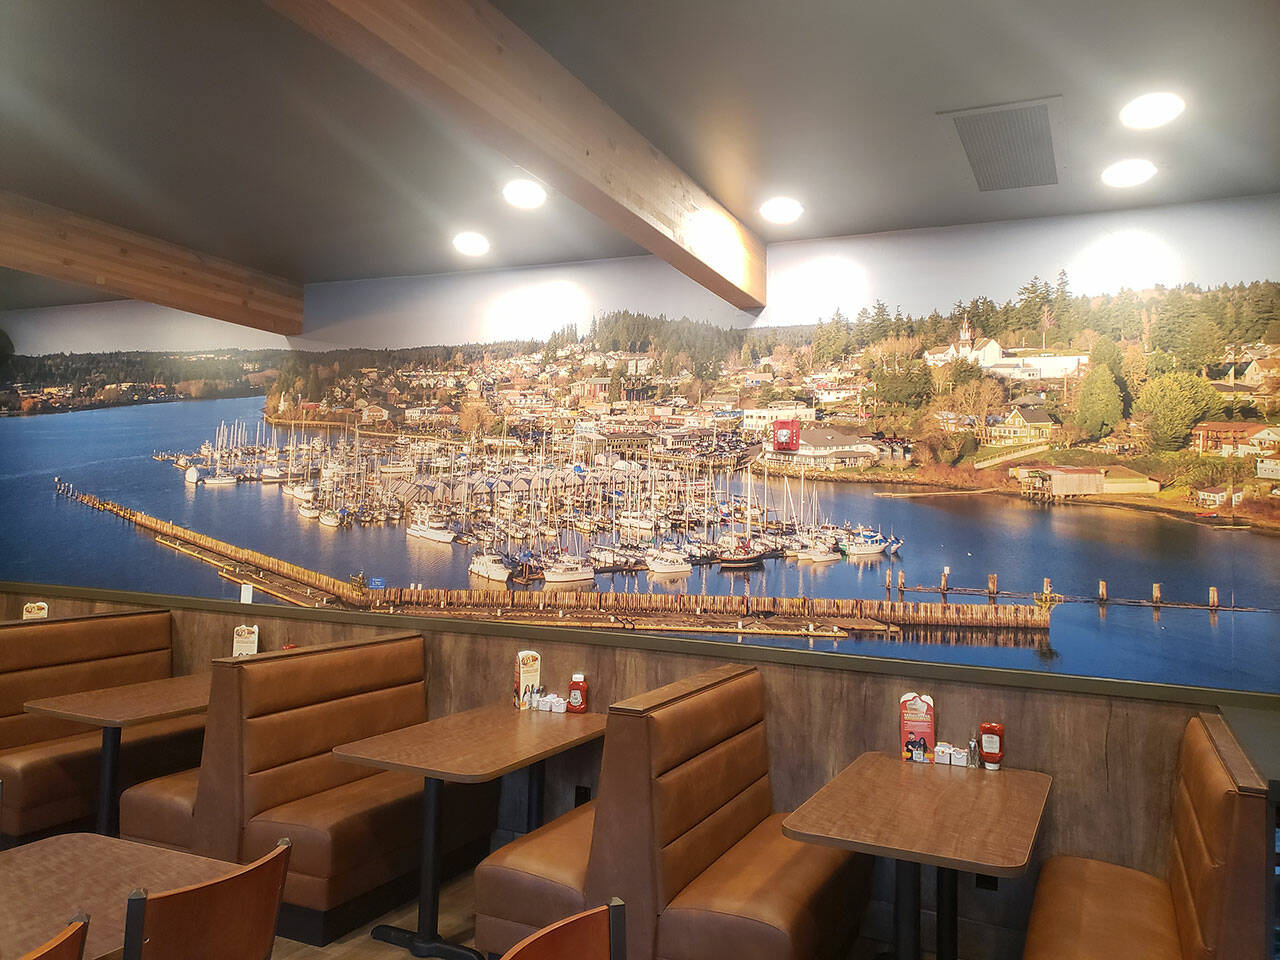 A large picture of Liberty Bay adorns one of the walls above seating booths. Tyler Shuey/Kitsap News Group Photos